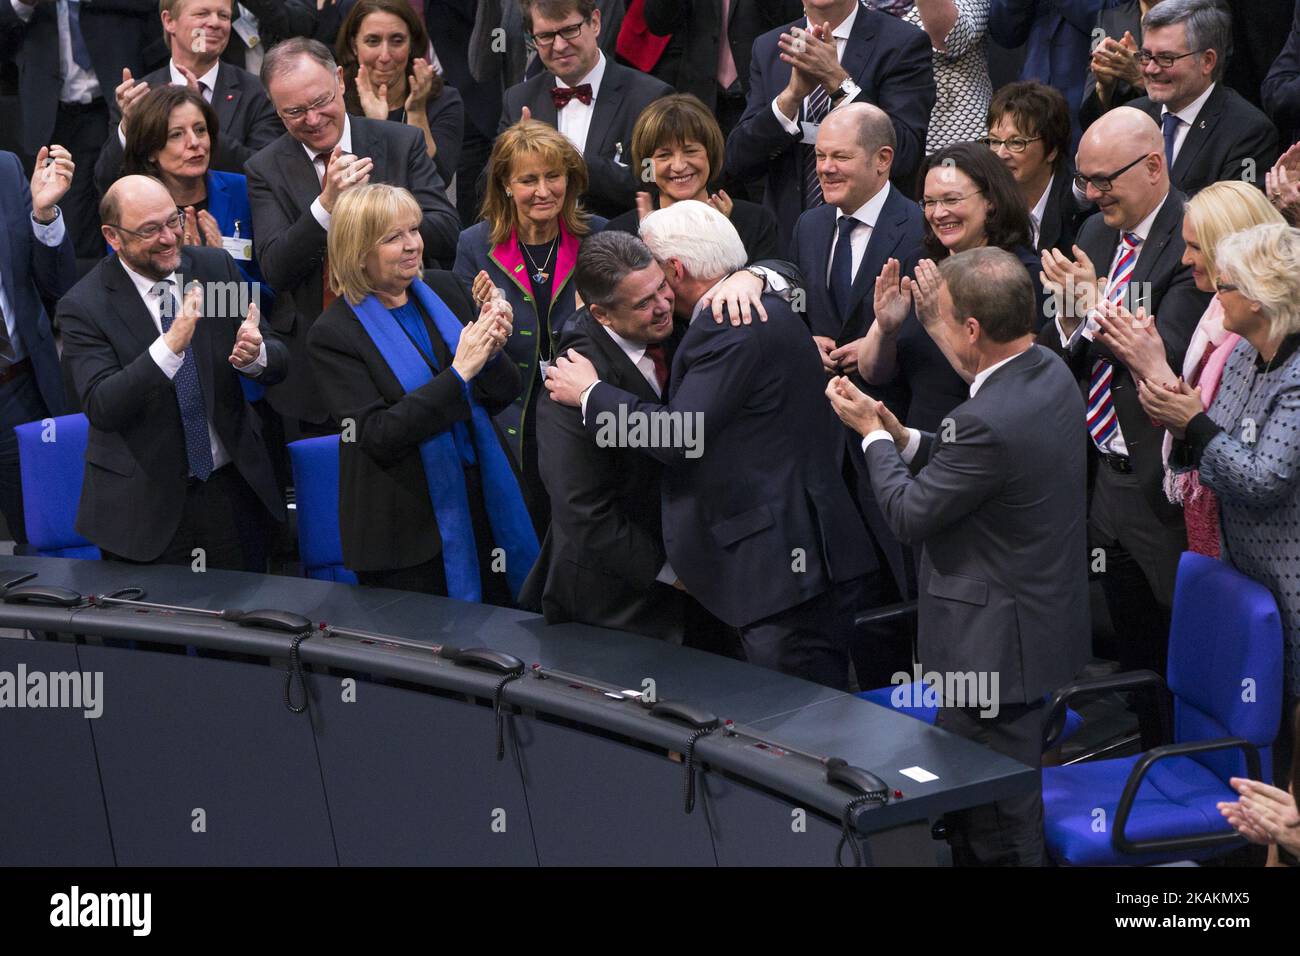 German new President Frank-Walter Steinmeier (first row, 2R) is congratulated from German Foreign Minister Sigmar Gabriel after being elected by the 16th Bundesversammlung (Federal Assembly) at the Bundestag in Berlin, Germany on February 12, 2017. Steinmeier, 61, obtained xyz votes out of 1,260 being the official candidate of the government parties CDU/CSU and SPD and supported from FDP and Green party, against poverty researcher Christoph Butterwegge, nominated by the left party Die Linke and Albrecht Glaser, nominated by the far right party AfD (Alternative for Germany). (Photo by Emmanuele Stock Photo